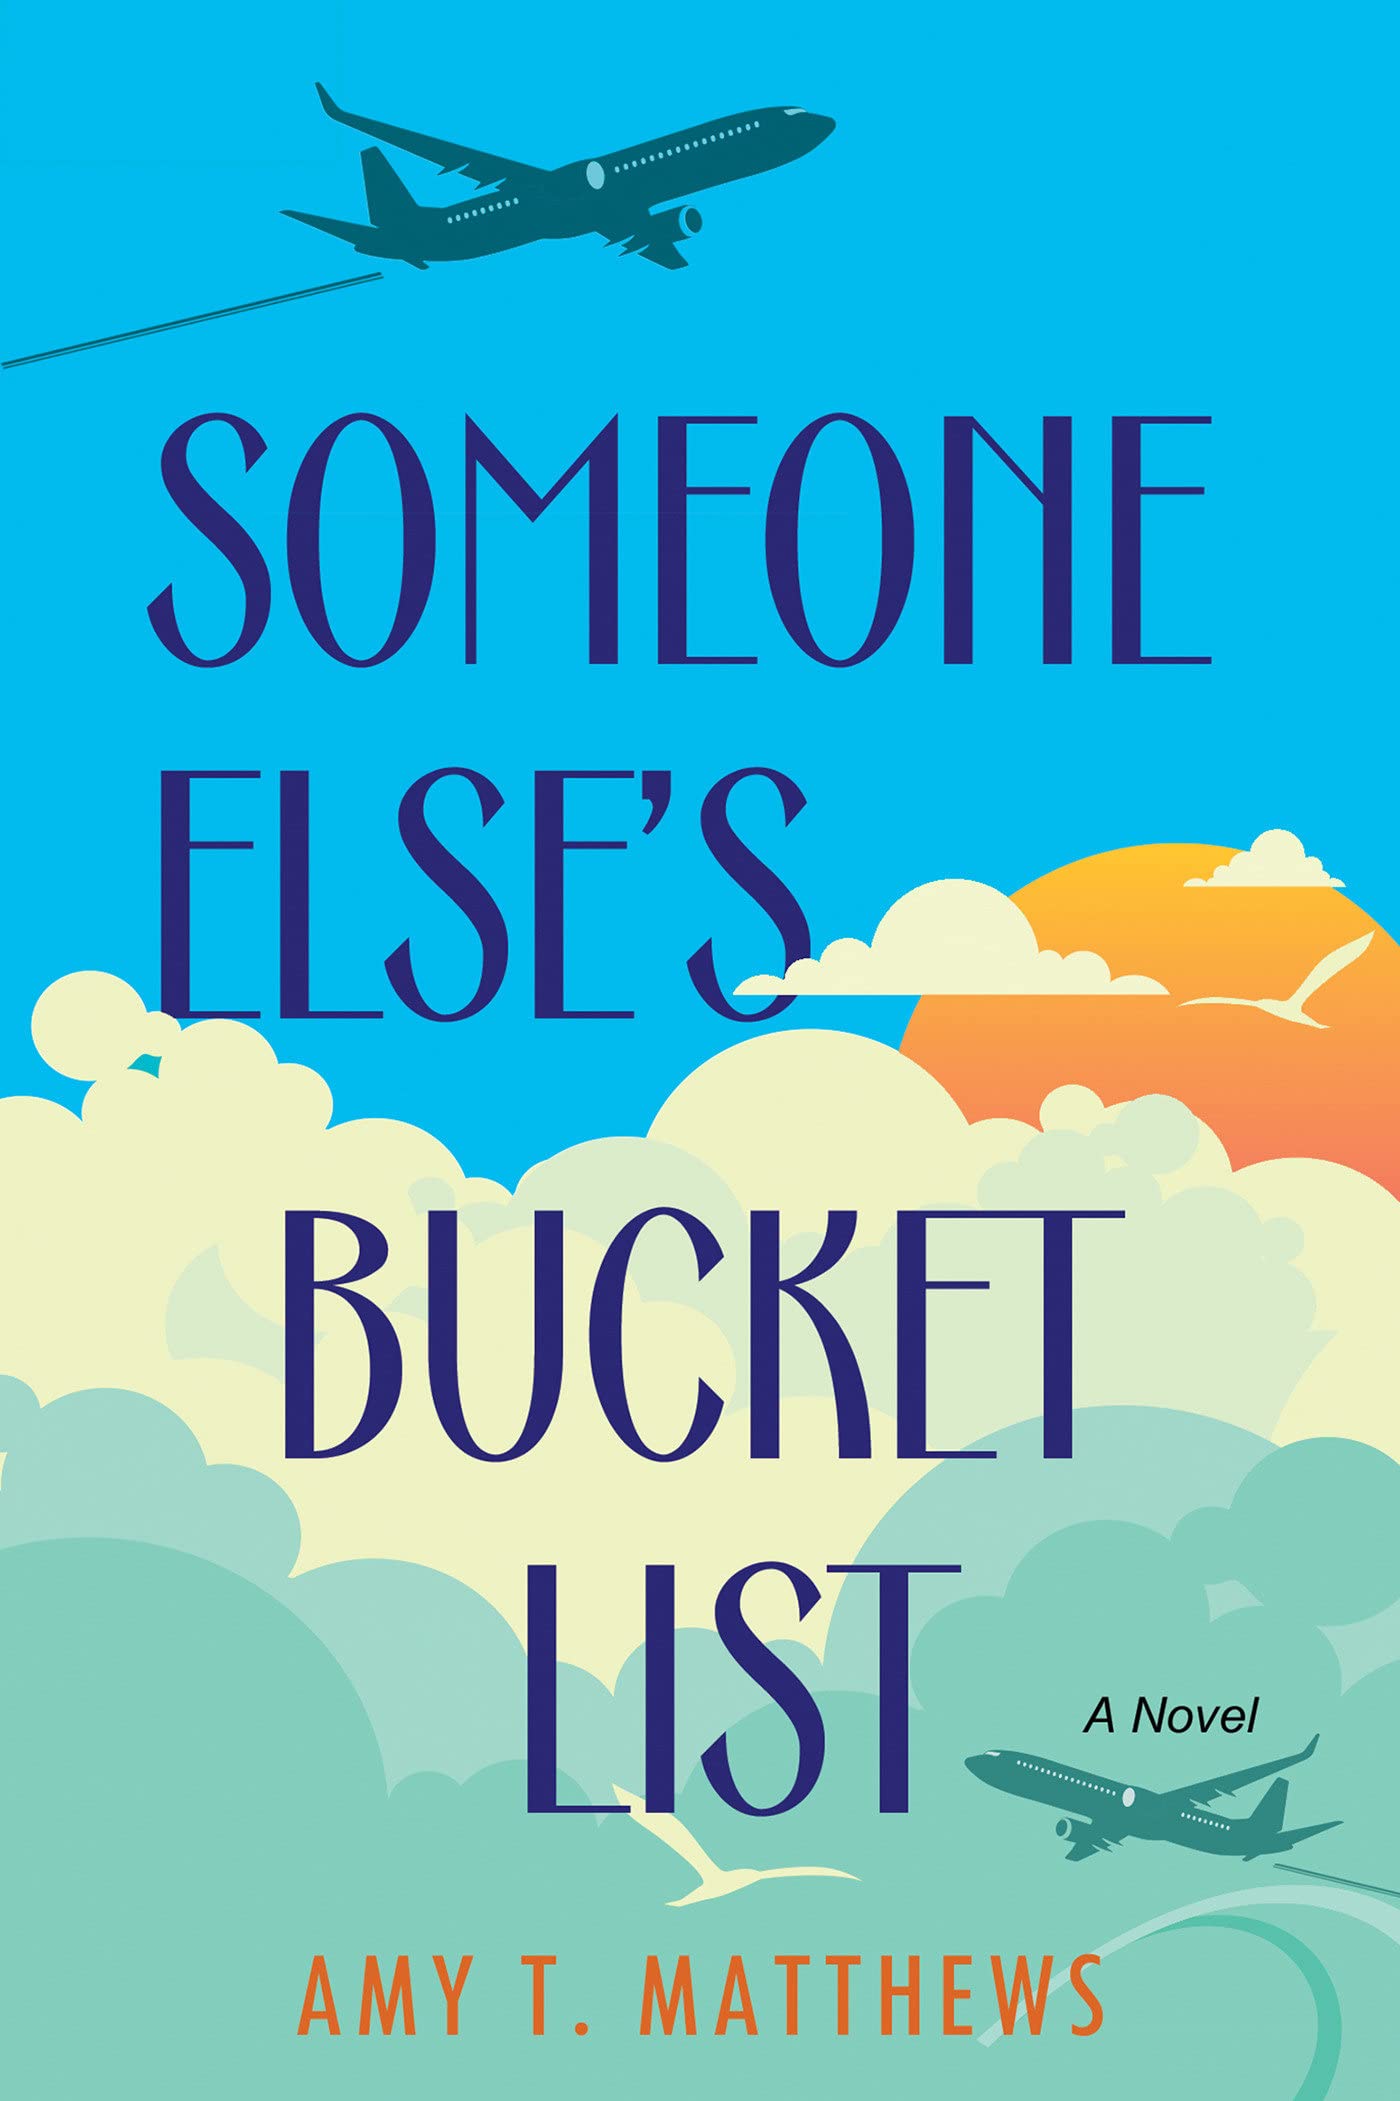 A Review of “Someone Else’s Bucket List” by Amy T. Matthews